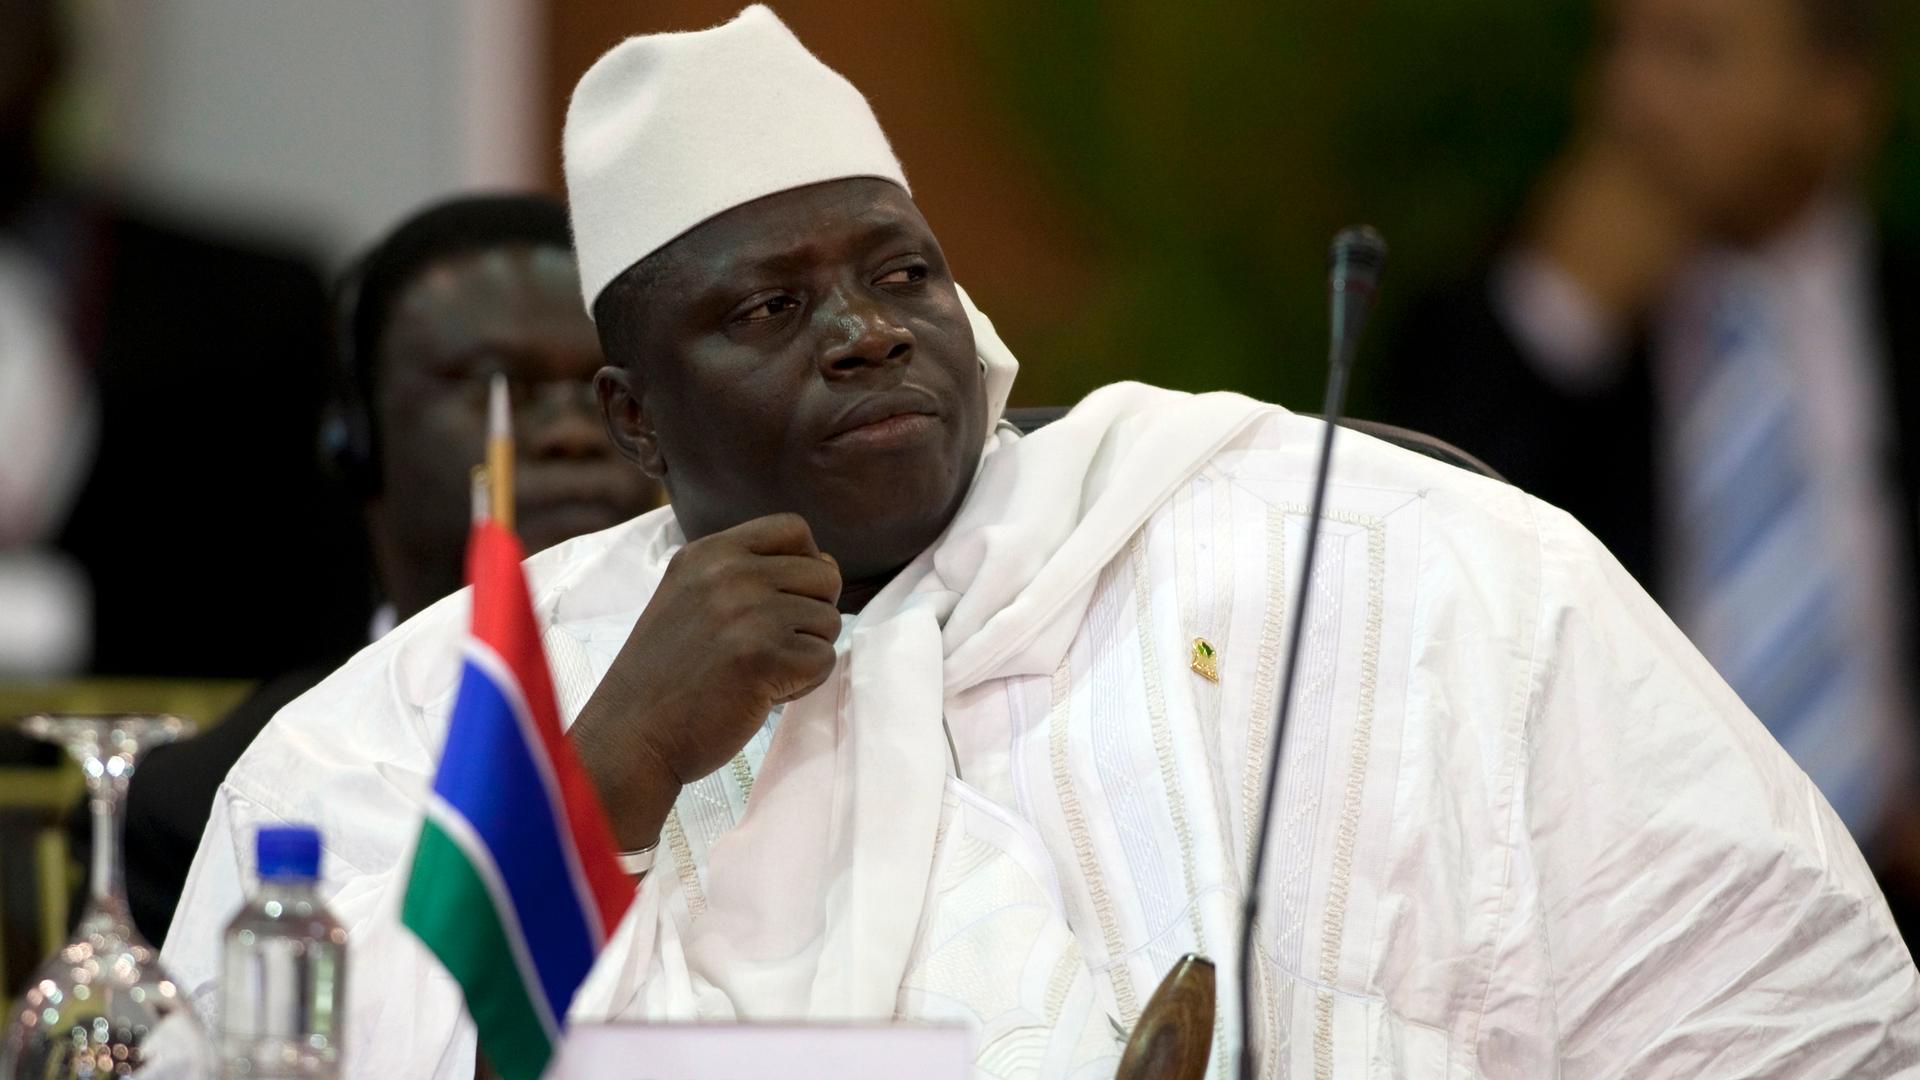 Gambia's president, Al Hadji Yahya Jammeh, attends the plenary session of the Africa-South America Summit in 2009.